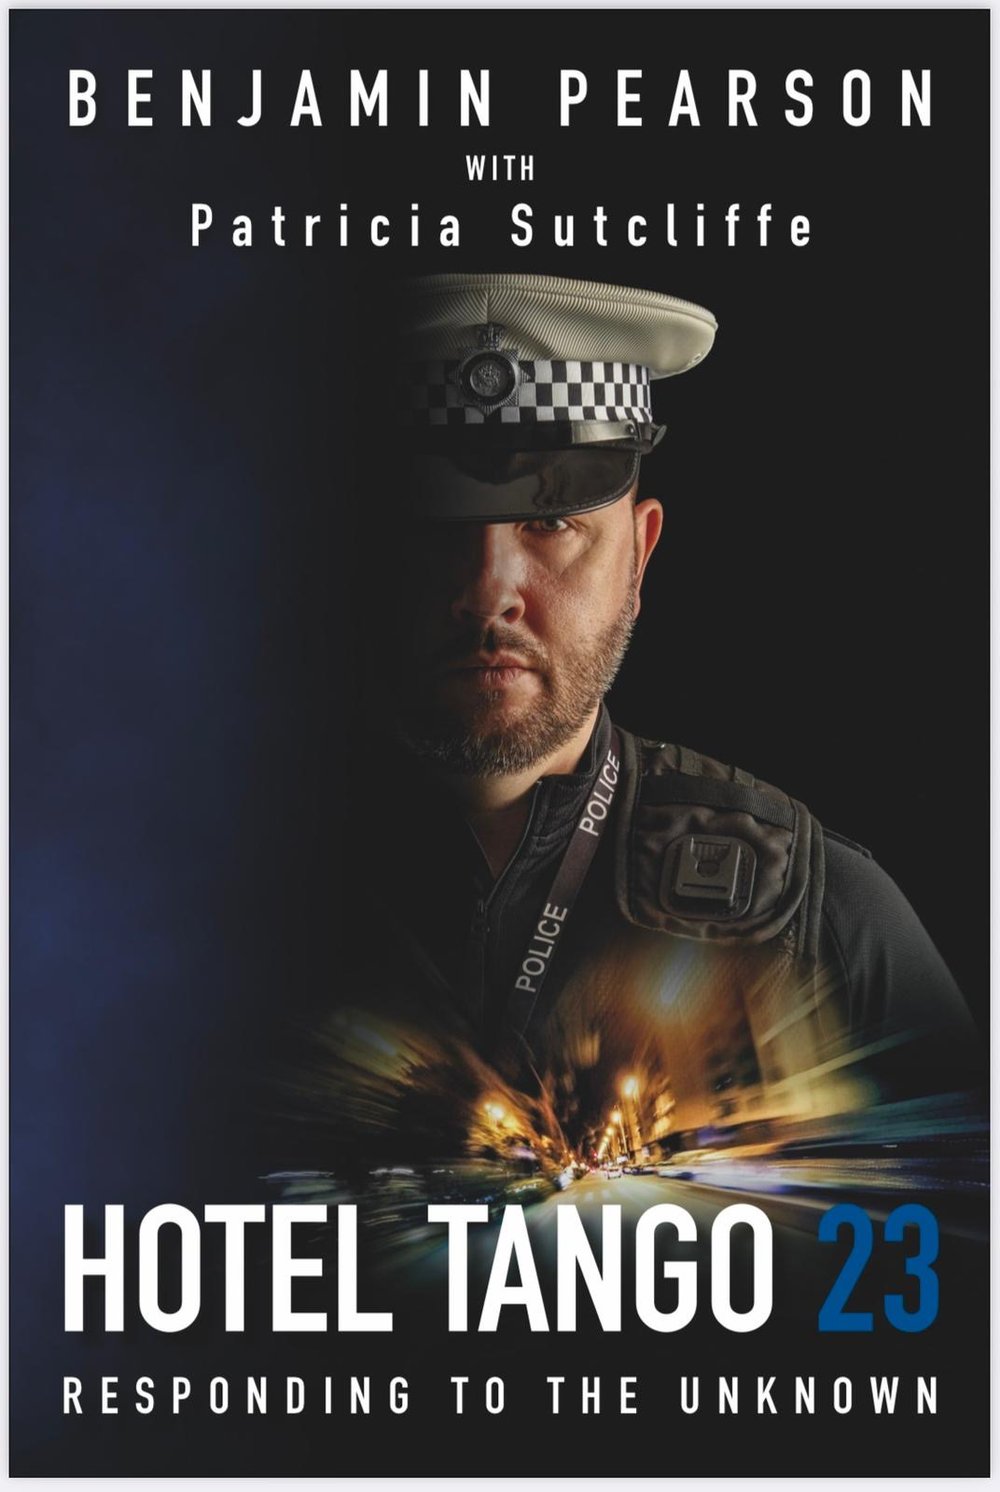 Limited edition hand signed copy of ‘Hotel Tango 23 : Responding To The Unknown’